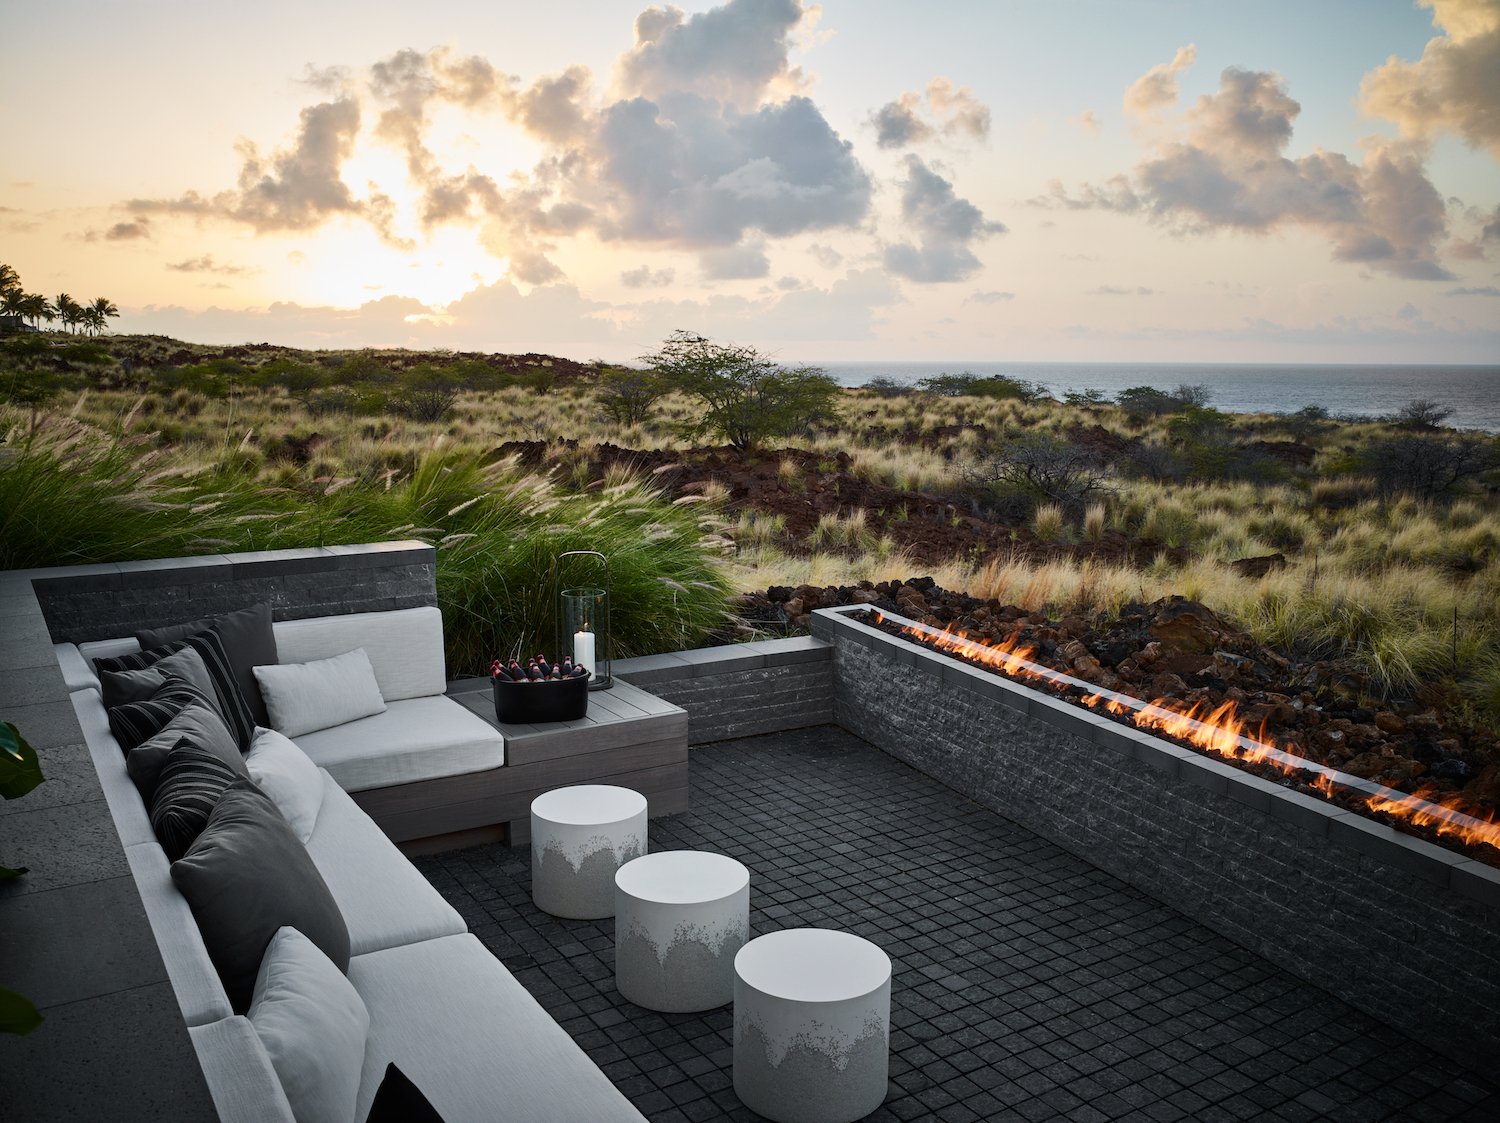 Terrace of home with pit seating, gas firewall and view out over the beach and ocean.